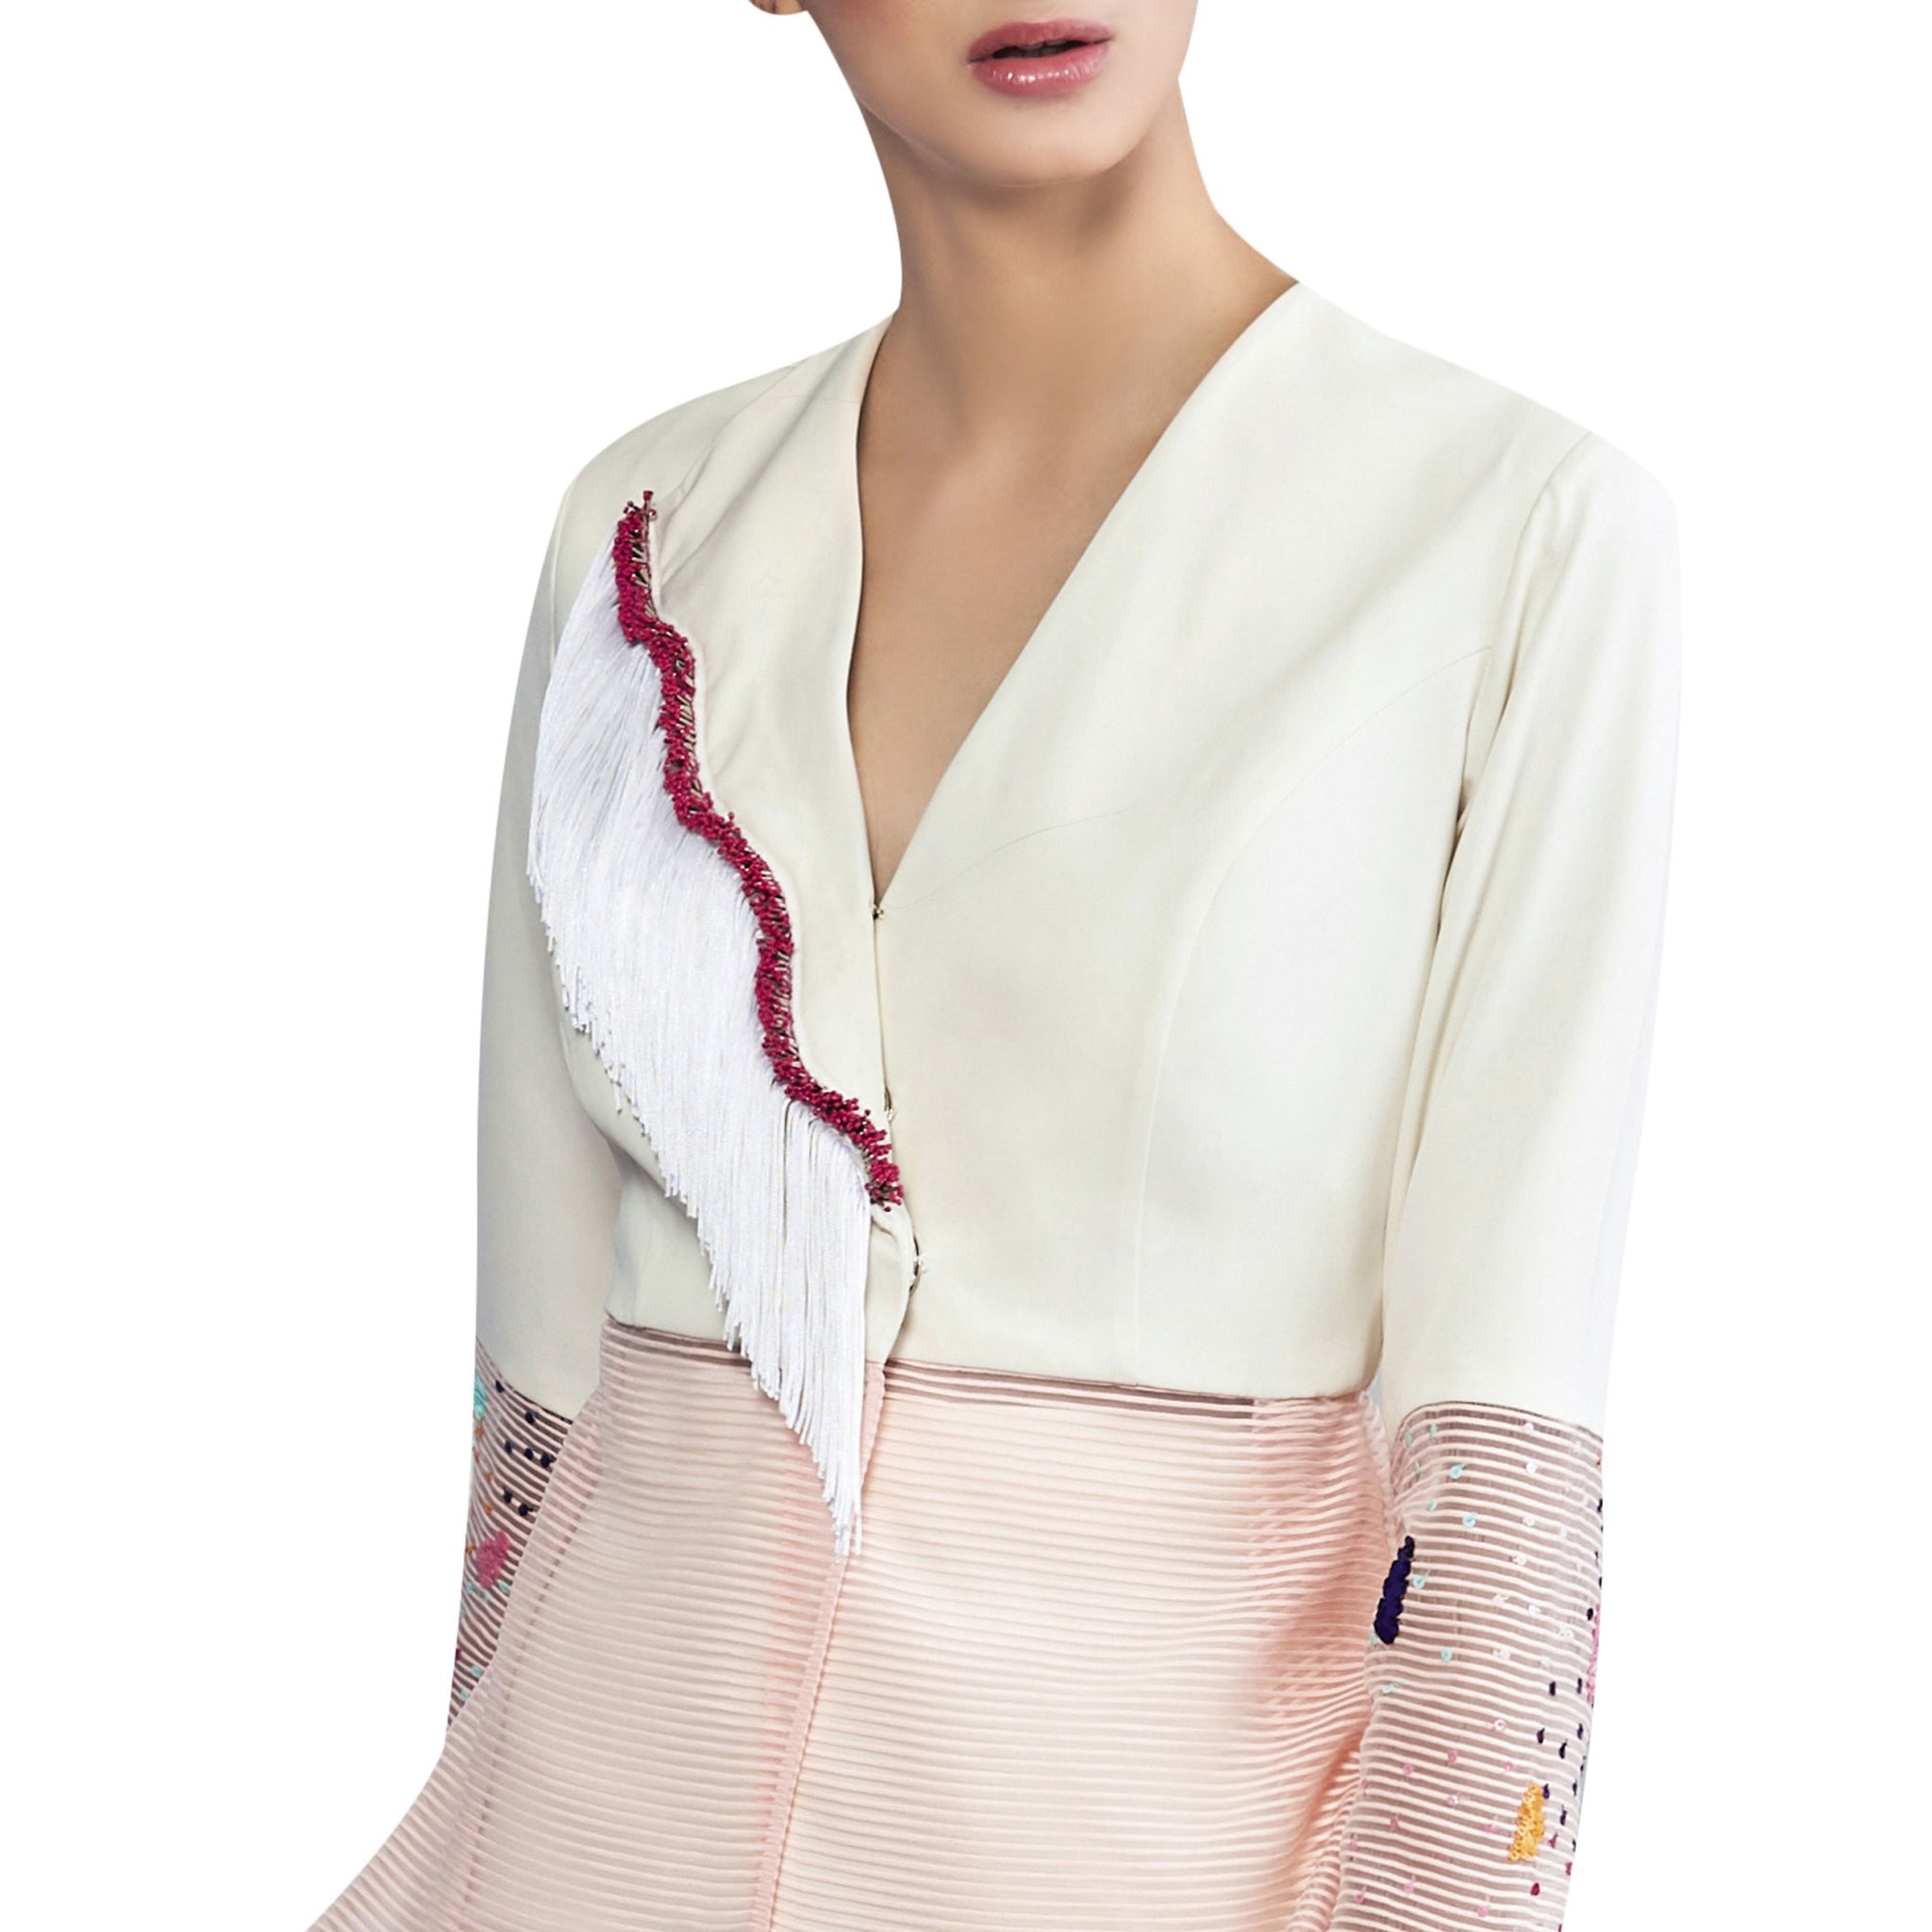 Peplum Jacket with Embroidered Sleeves and Lapel